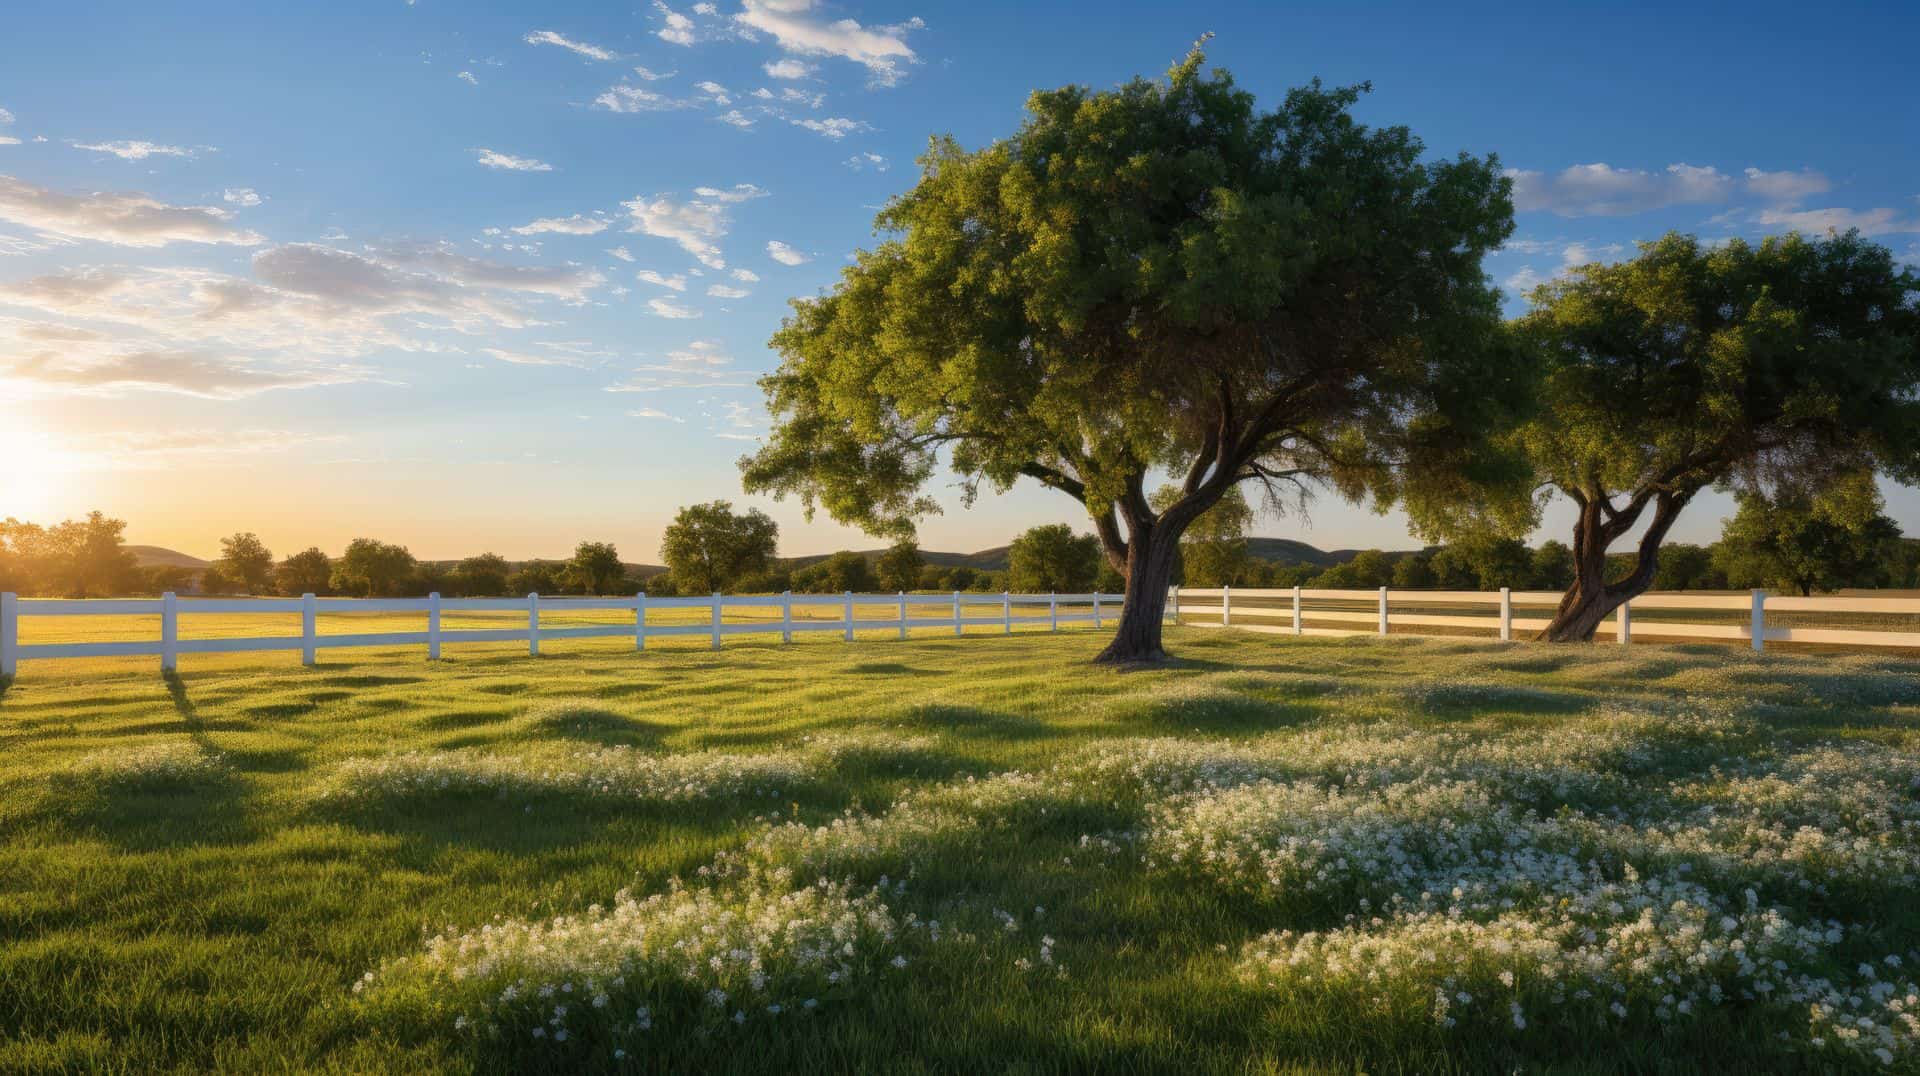 Vinyl ranch rail style fence surrounding grassy lawn, with trees in the background - picturesque countryside scene